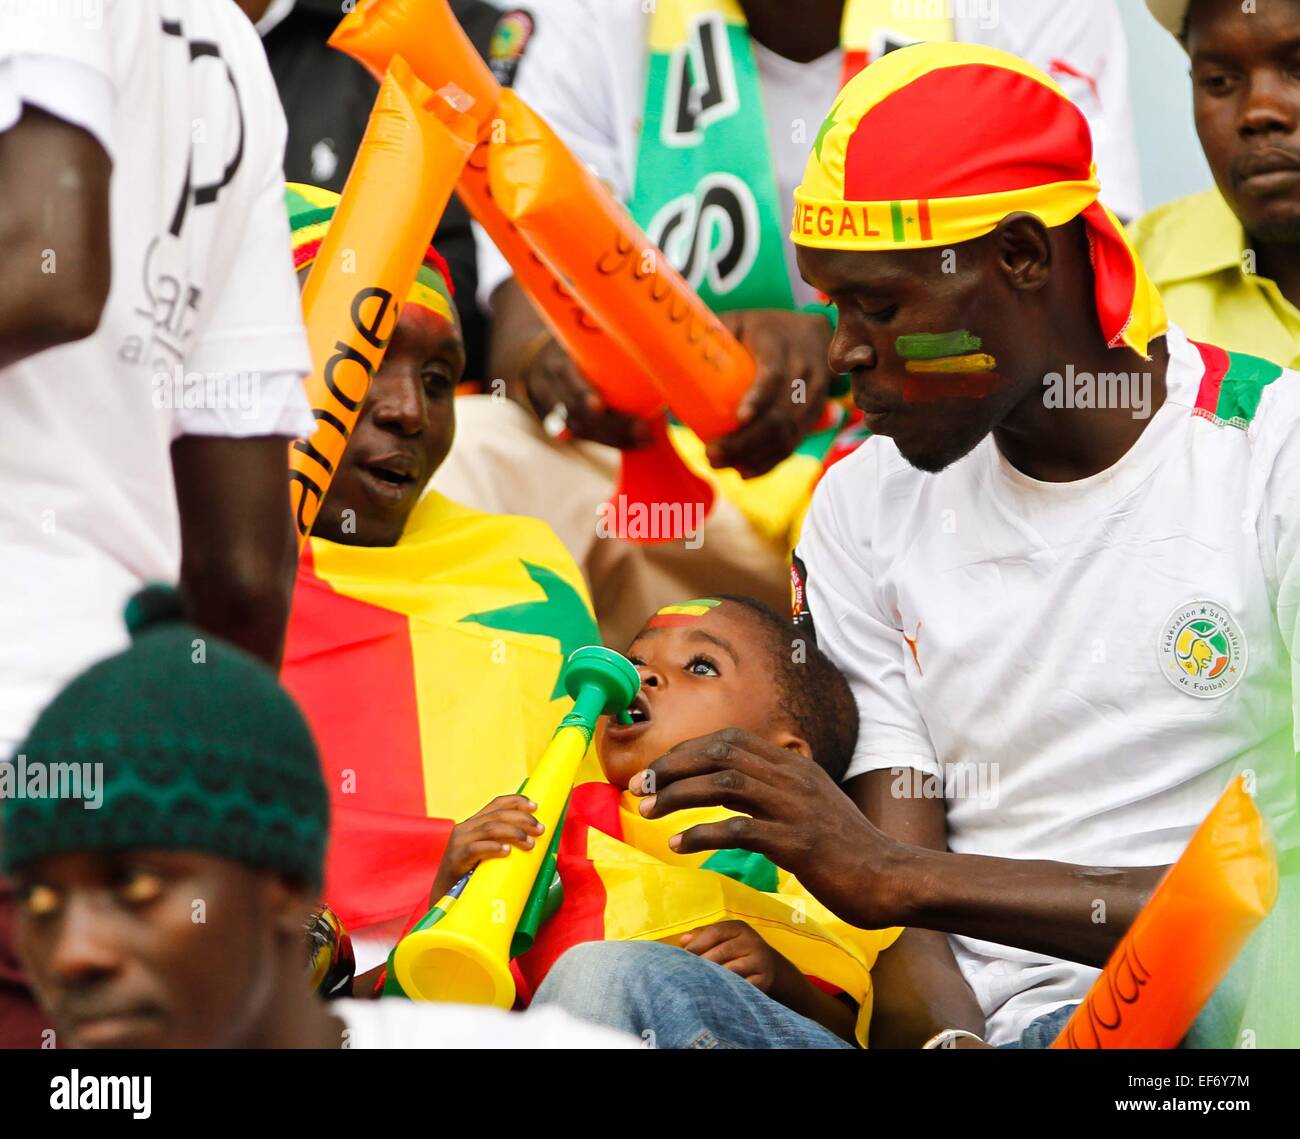 Malabo, Equatorial Guinea. 27th Jan, 2015. Football fans of Senegal are seen before the group match of Africa Cup of Nations between Senegal and Algeria at the Stadium of Malabo, Equatorial Guinea, Jan. 27, 2015. Credit:  Li Jing/Xinhua/Alamy Live News Stock Photo